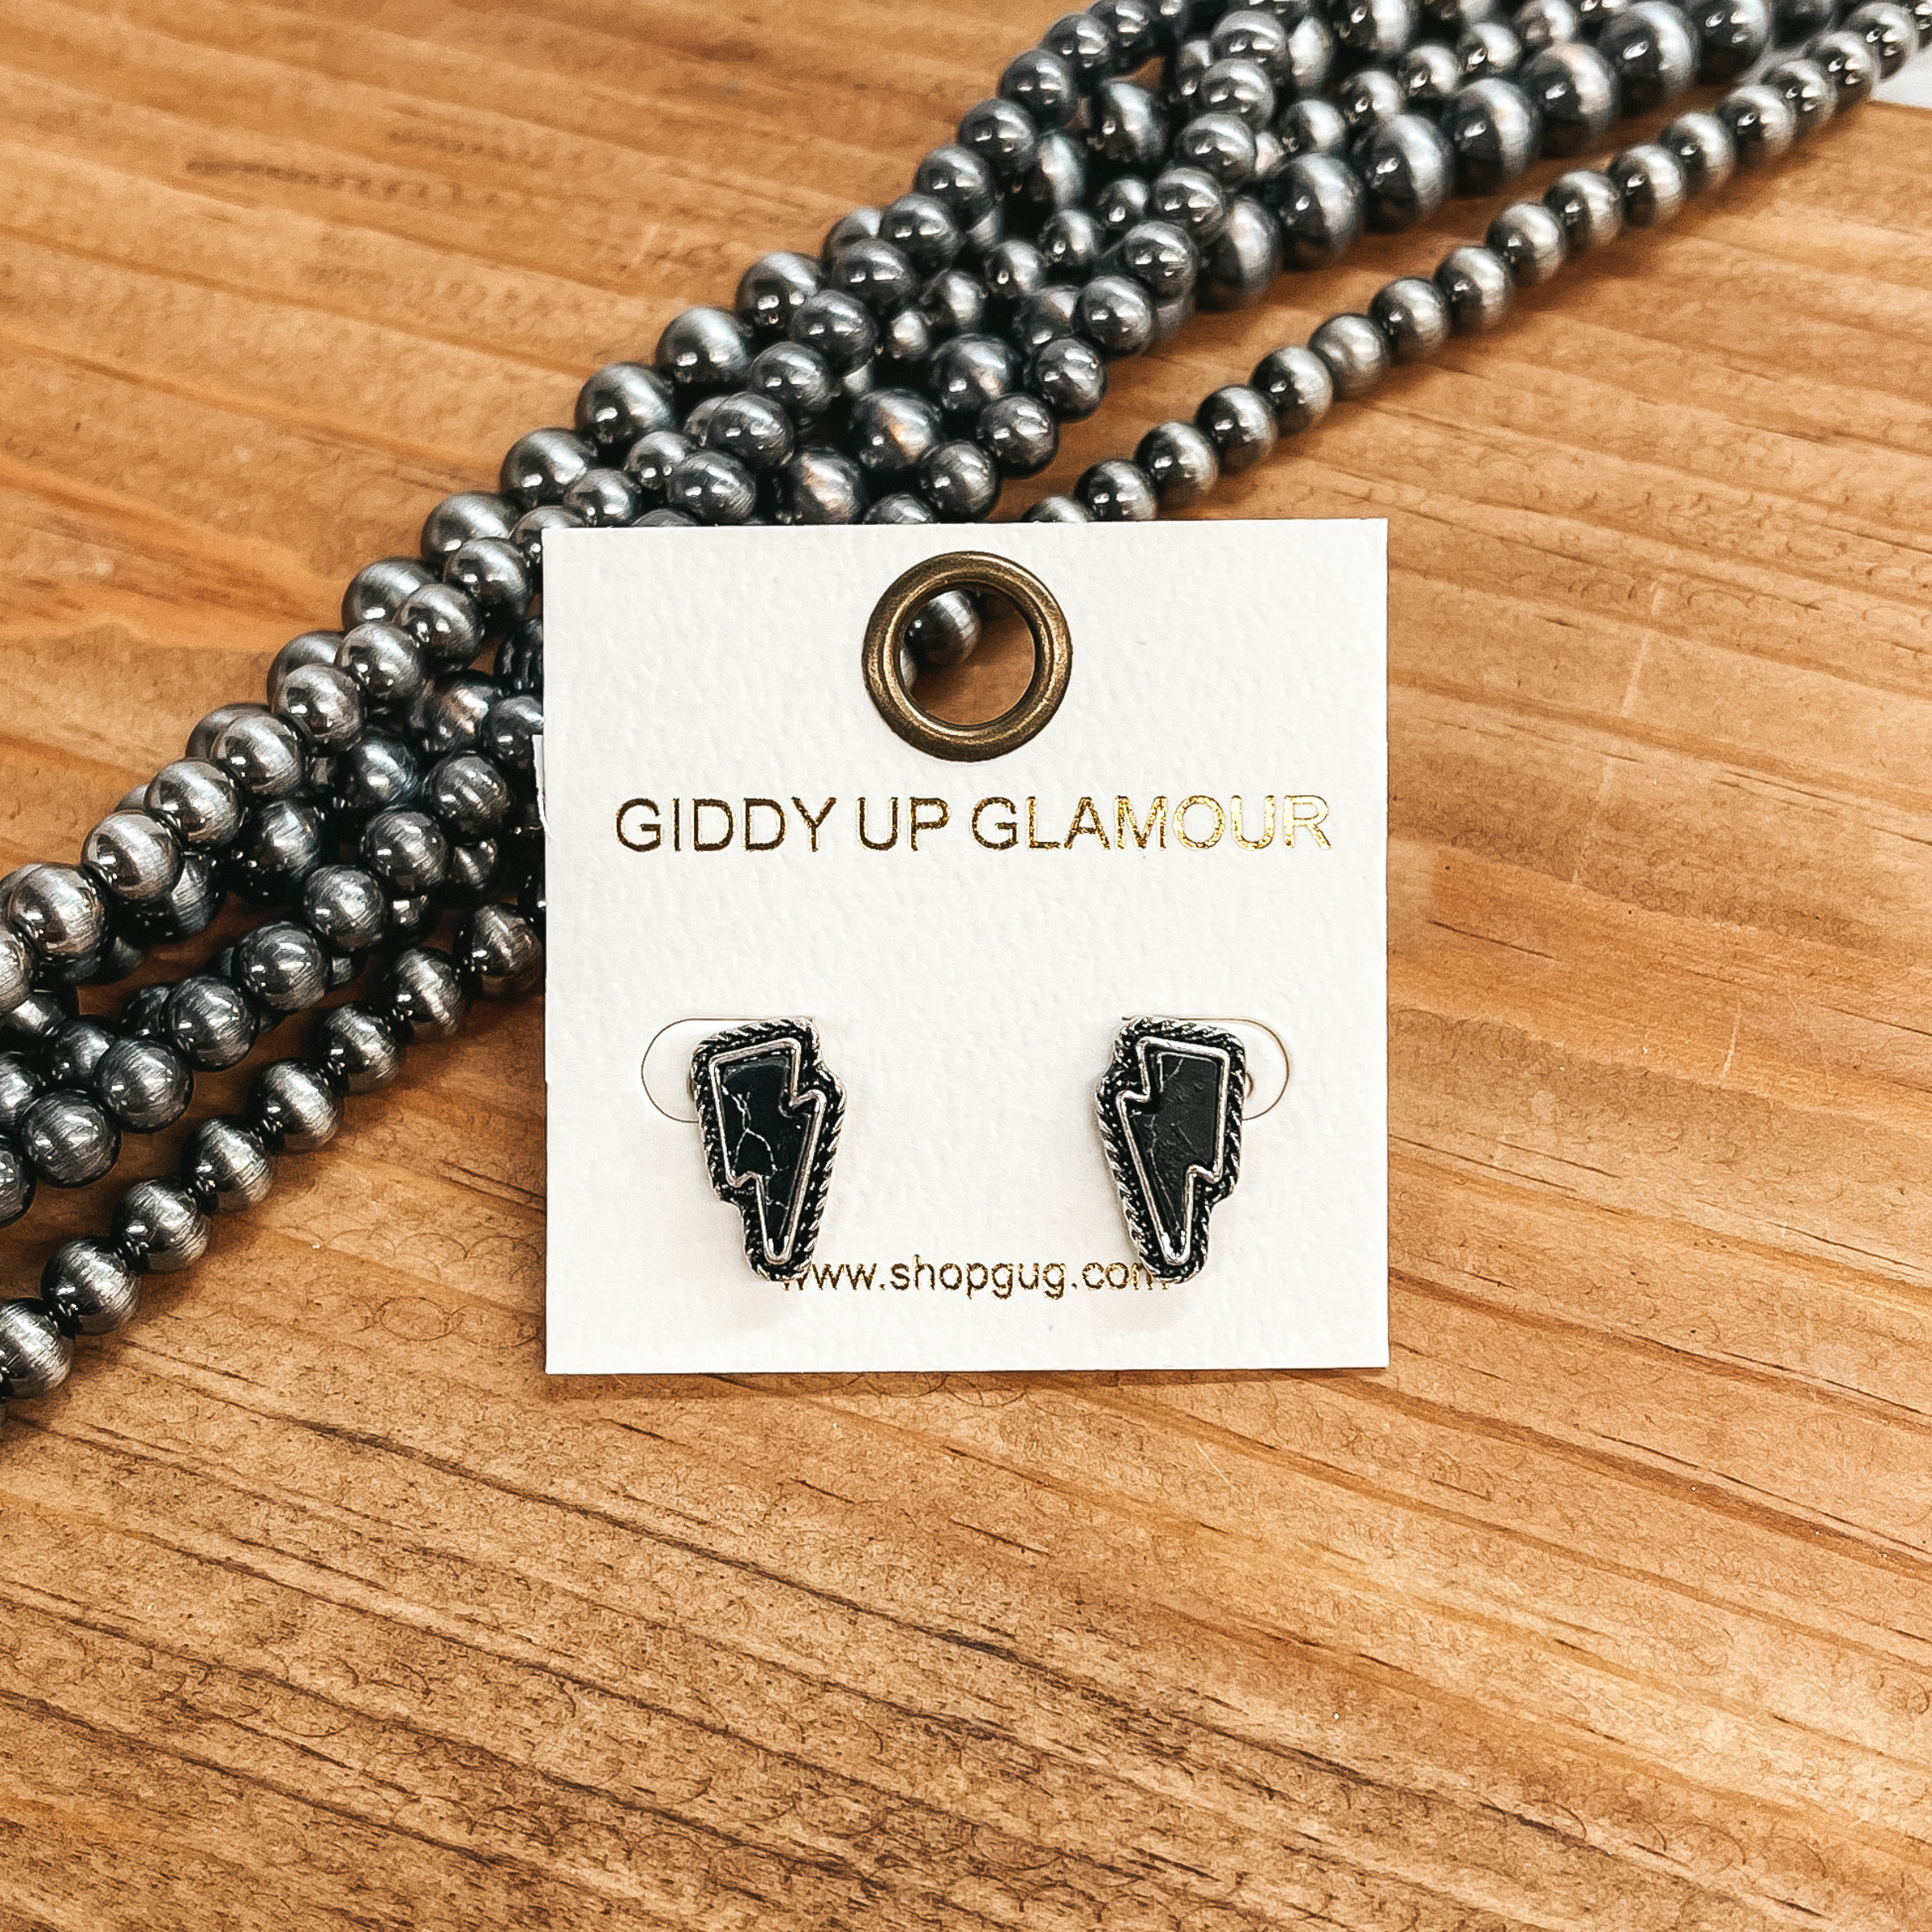 These are small lightning bolt faux black  stone in a silver setting with detailing. These  earrings are taken on a brown block with Navajo  pearls in the side as decor.